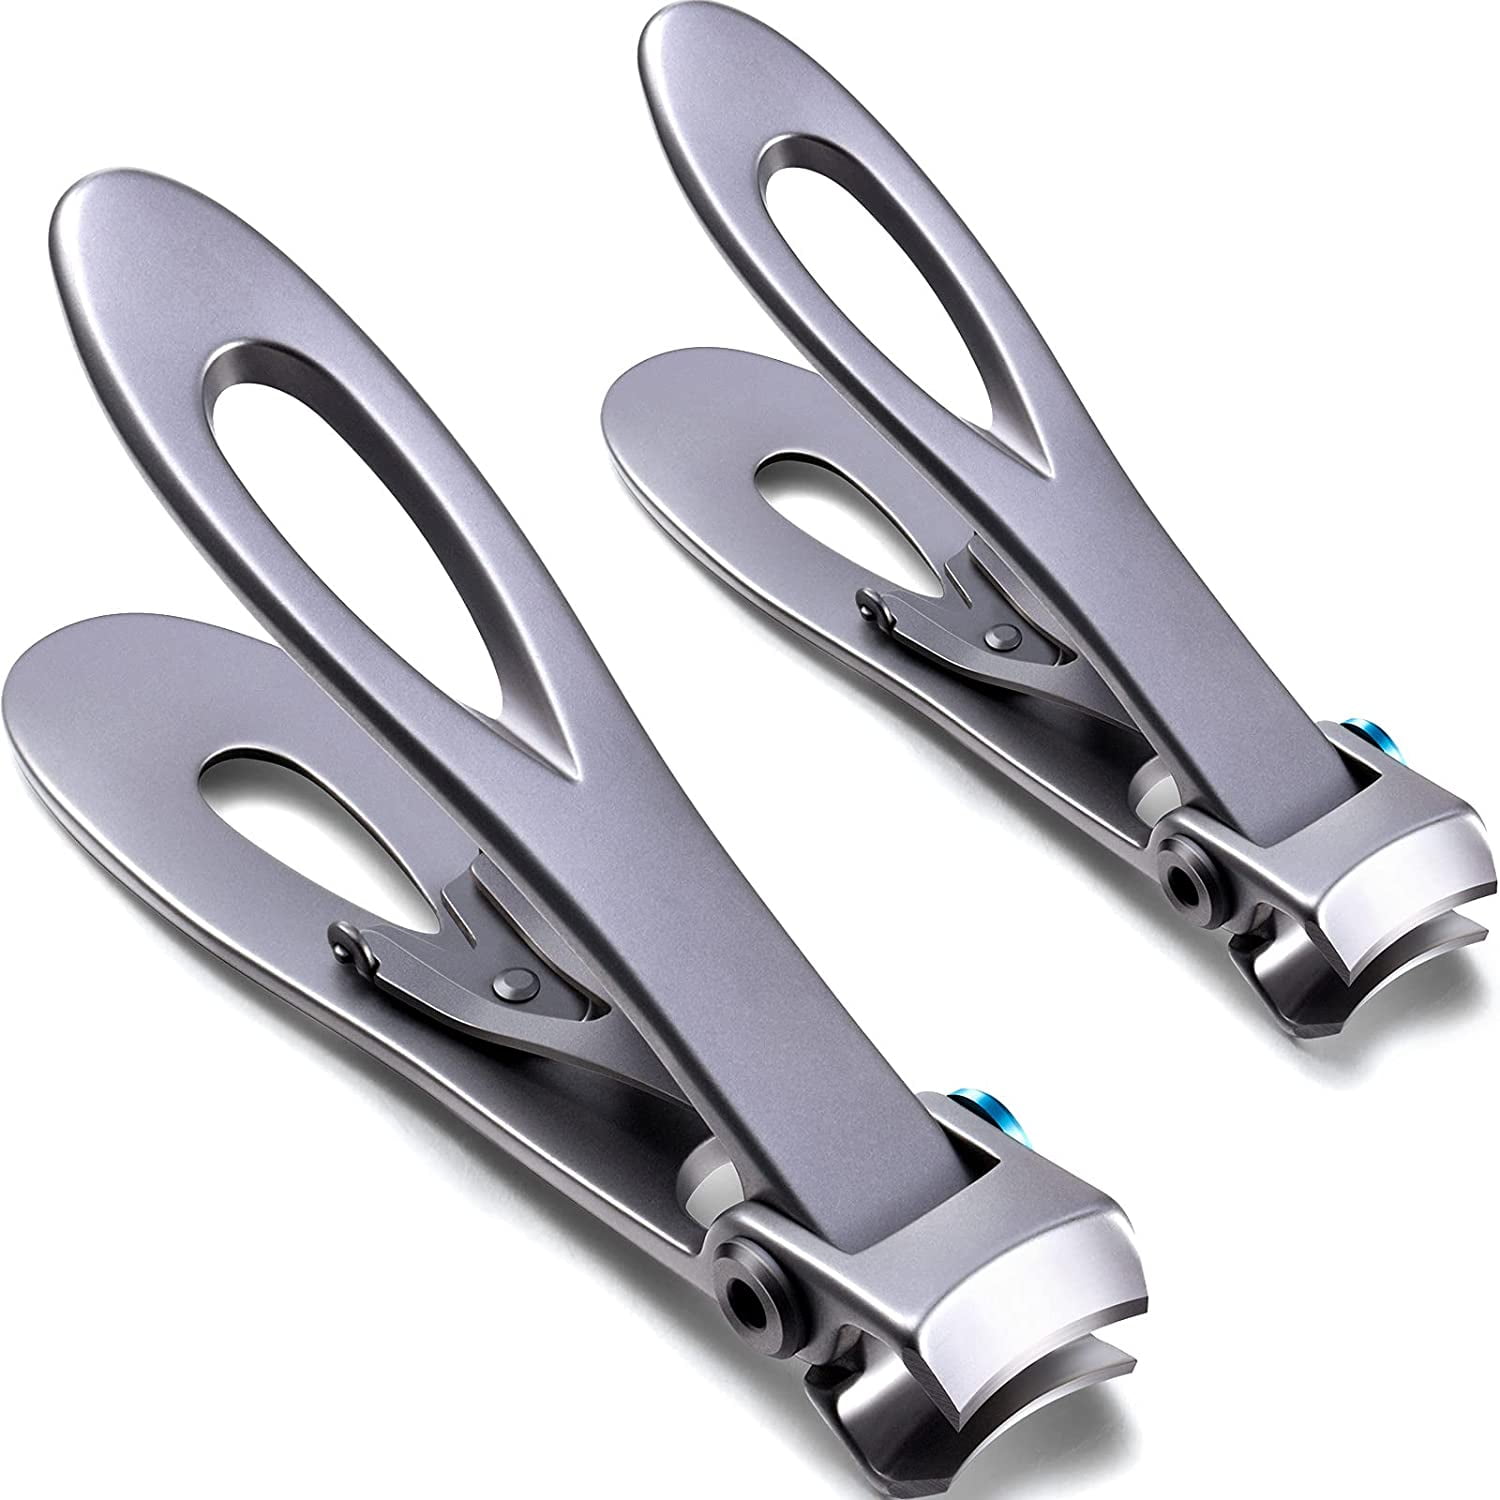 Heavy Duty Toenail Clippers for Seniors Thick Toenails for Men Women with  Anti Slip Handle Toe Nail Clippers for Ingrown Nails - AliExpress